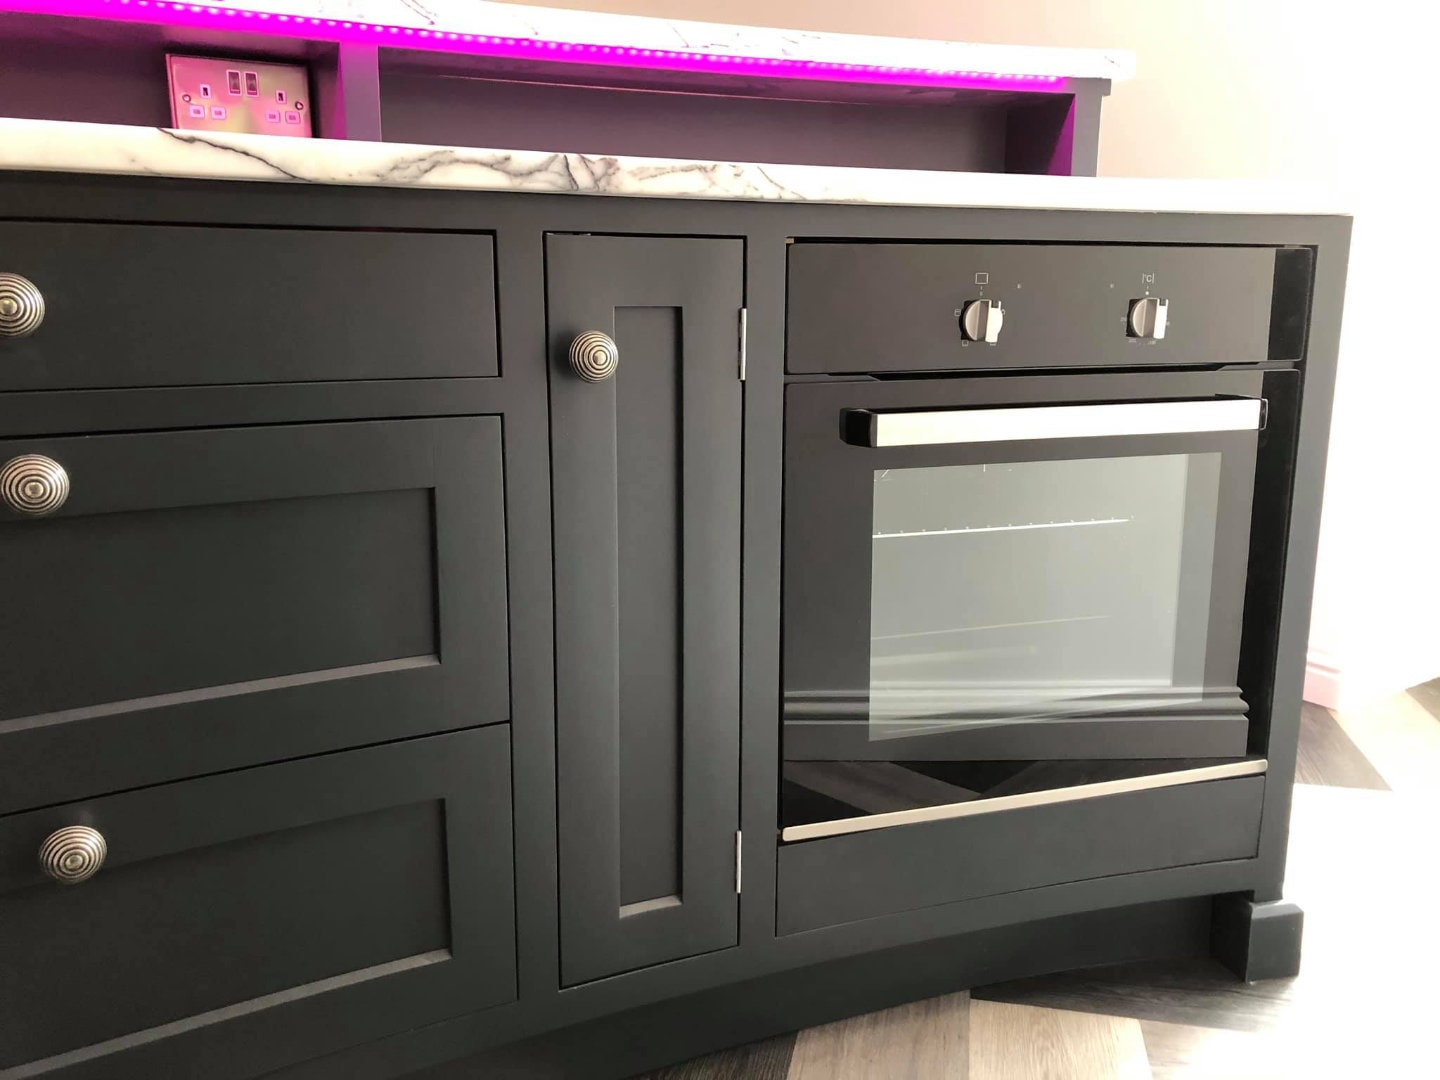 Beautiful storage cabinets and oven, fitted in a drinks bar.